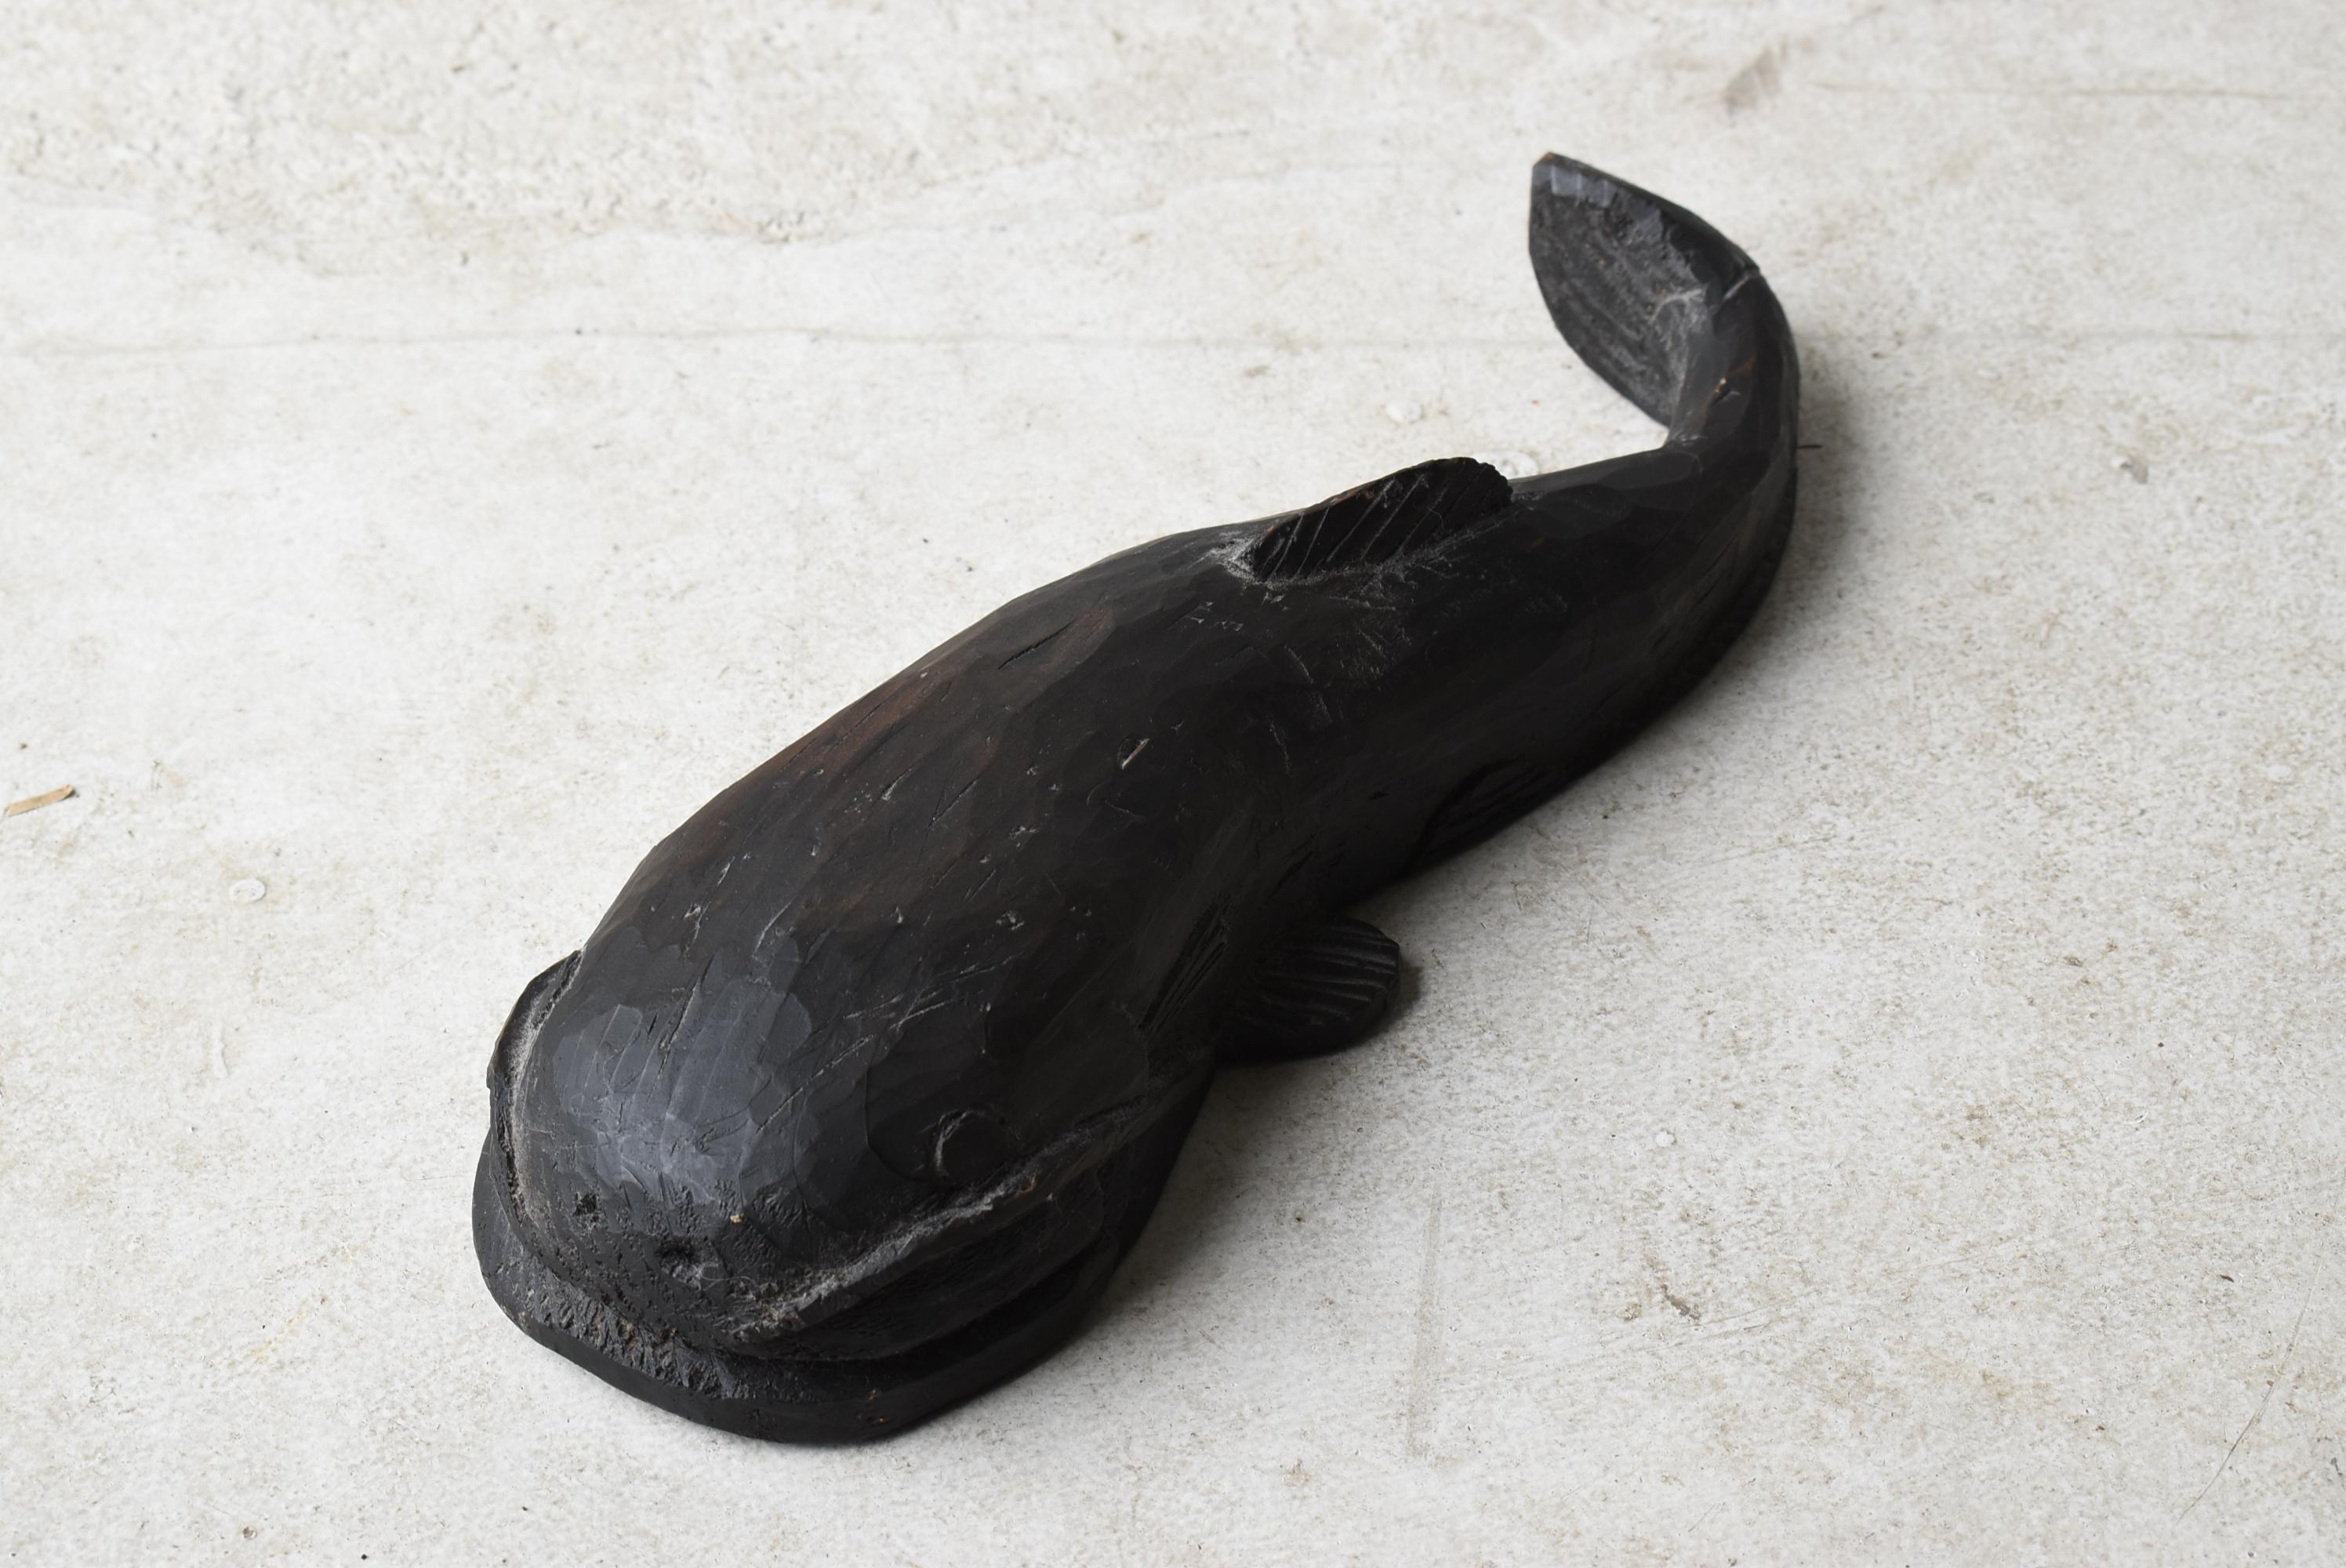 This is a wood carving of a very old Japanese catfish.
It is a wood carving from the Meiji period (1860s-1900s).
It is made of cedar wood.

In the old days, farmers suffered from pests that destroyed their crops.
At that time, a swarm of catfish